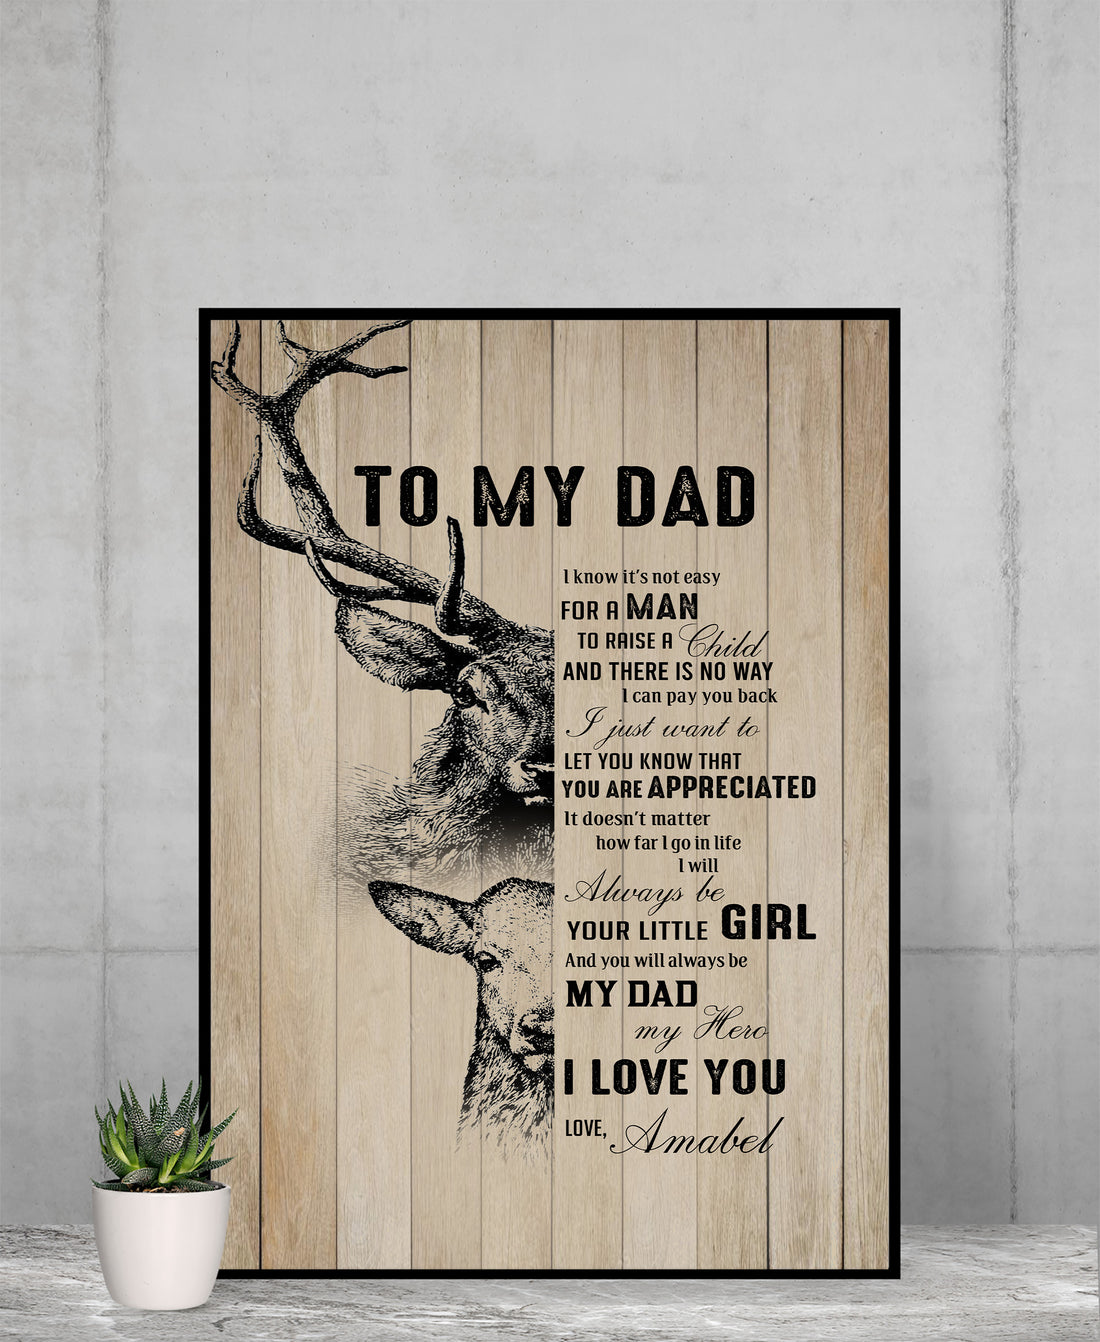 Canvas Wall Art, To My Dad Poster, Daughter And Dad, Deer Hunting, Father's Day Gifts, Dad Birthday Gifts, Living Room Decorations